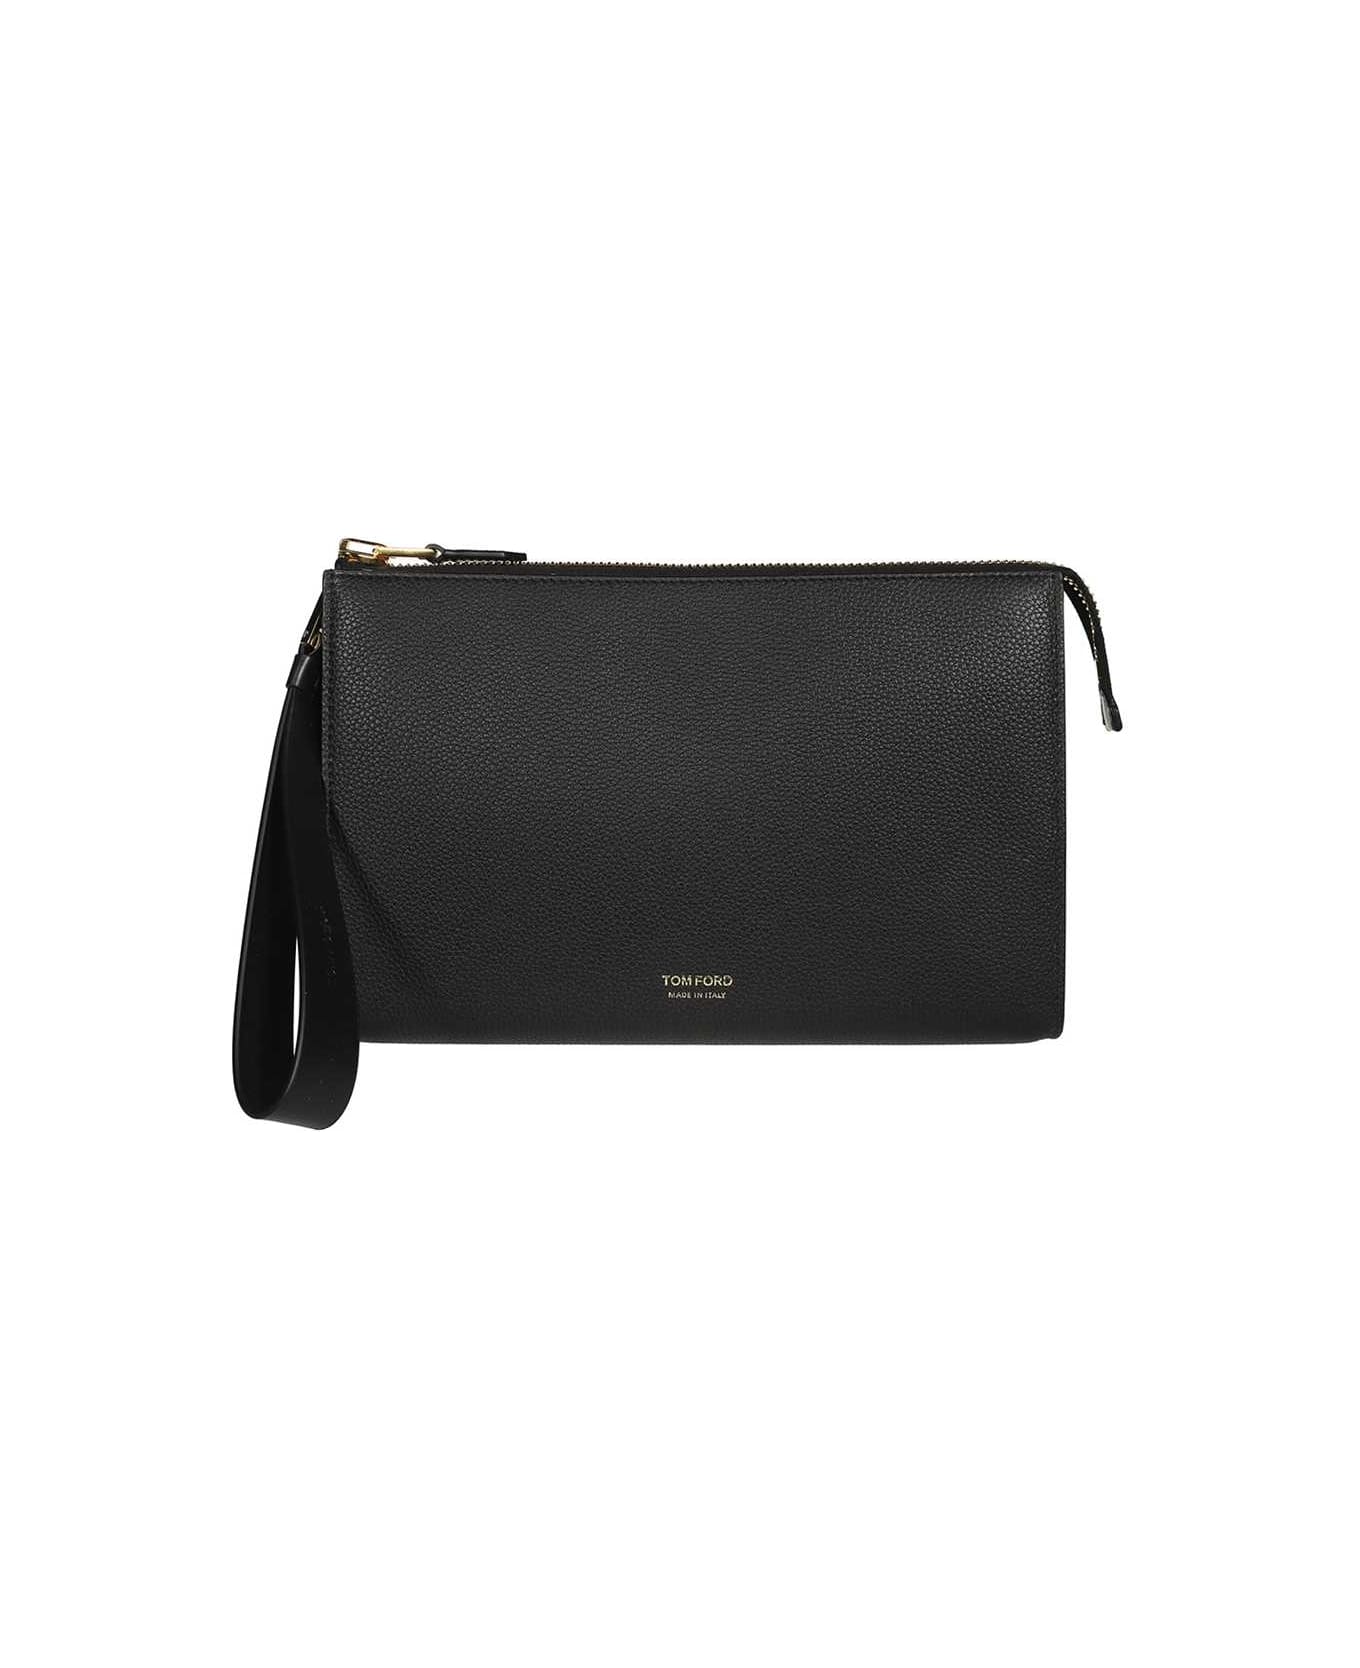 Tom Ford Leather Flat Pouch - black バッグ